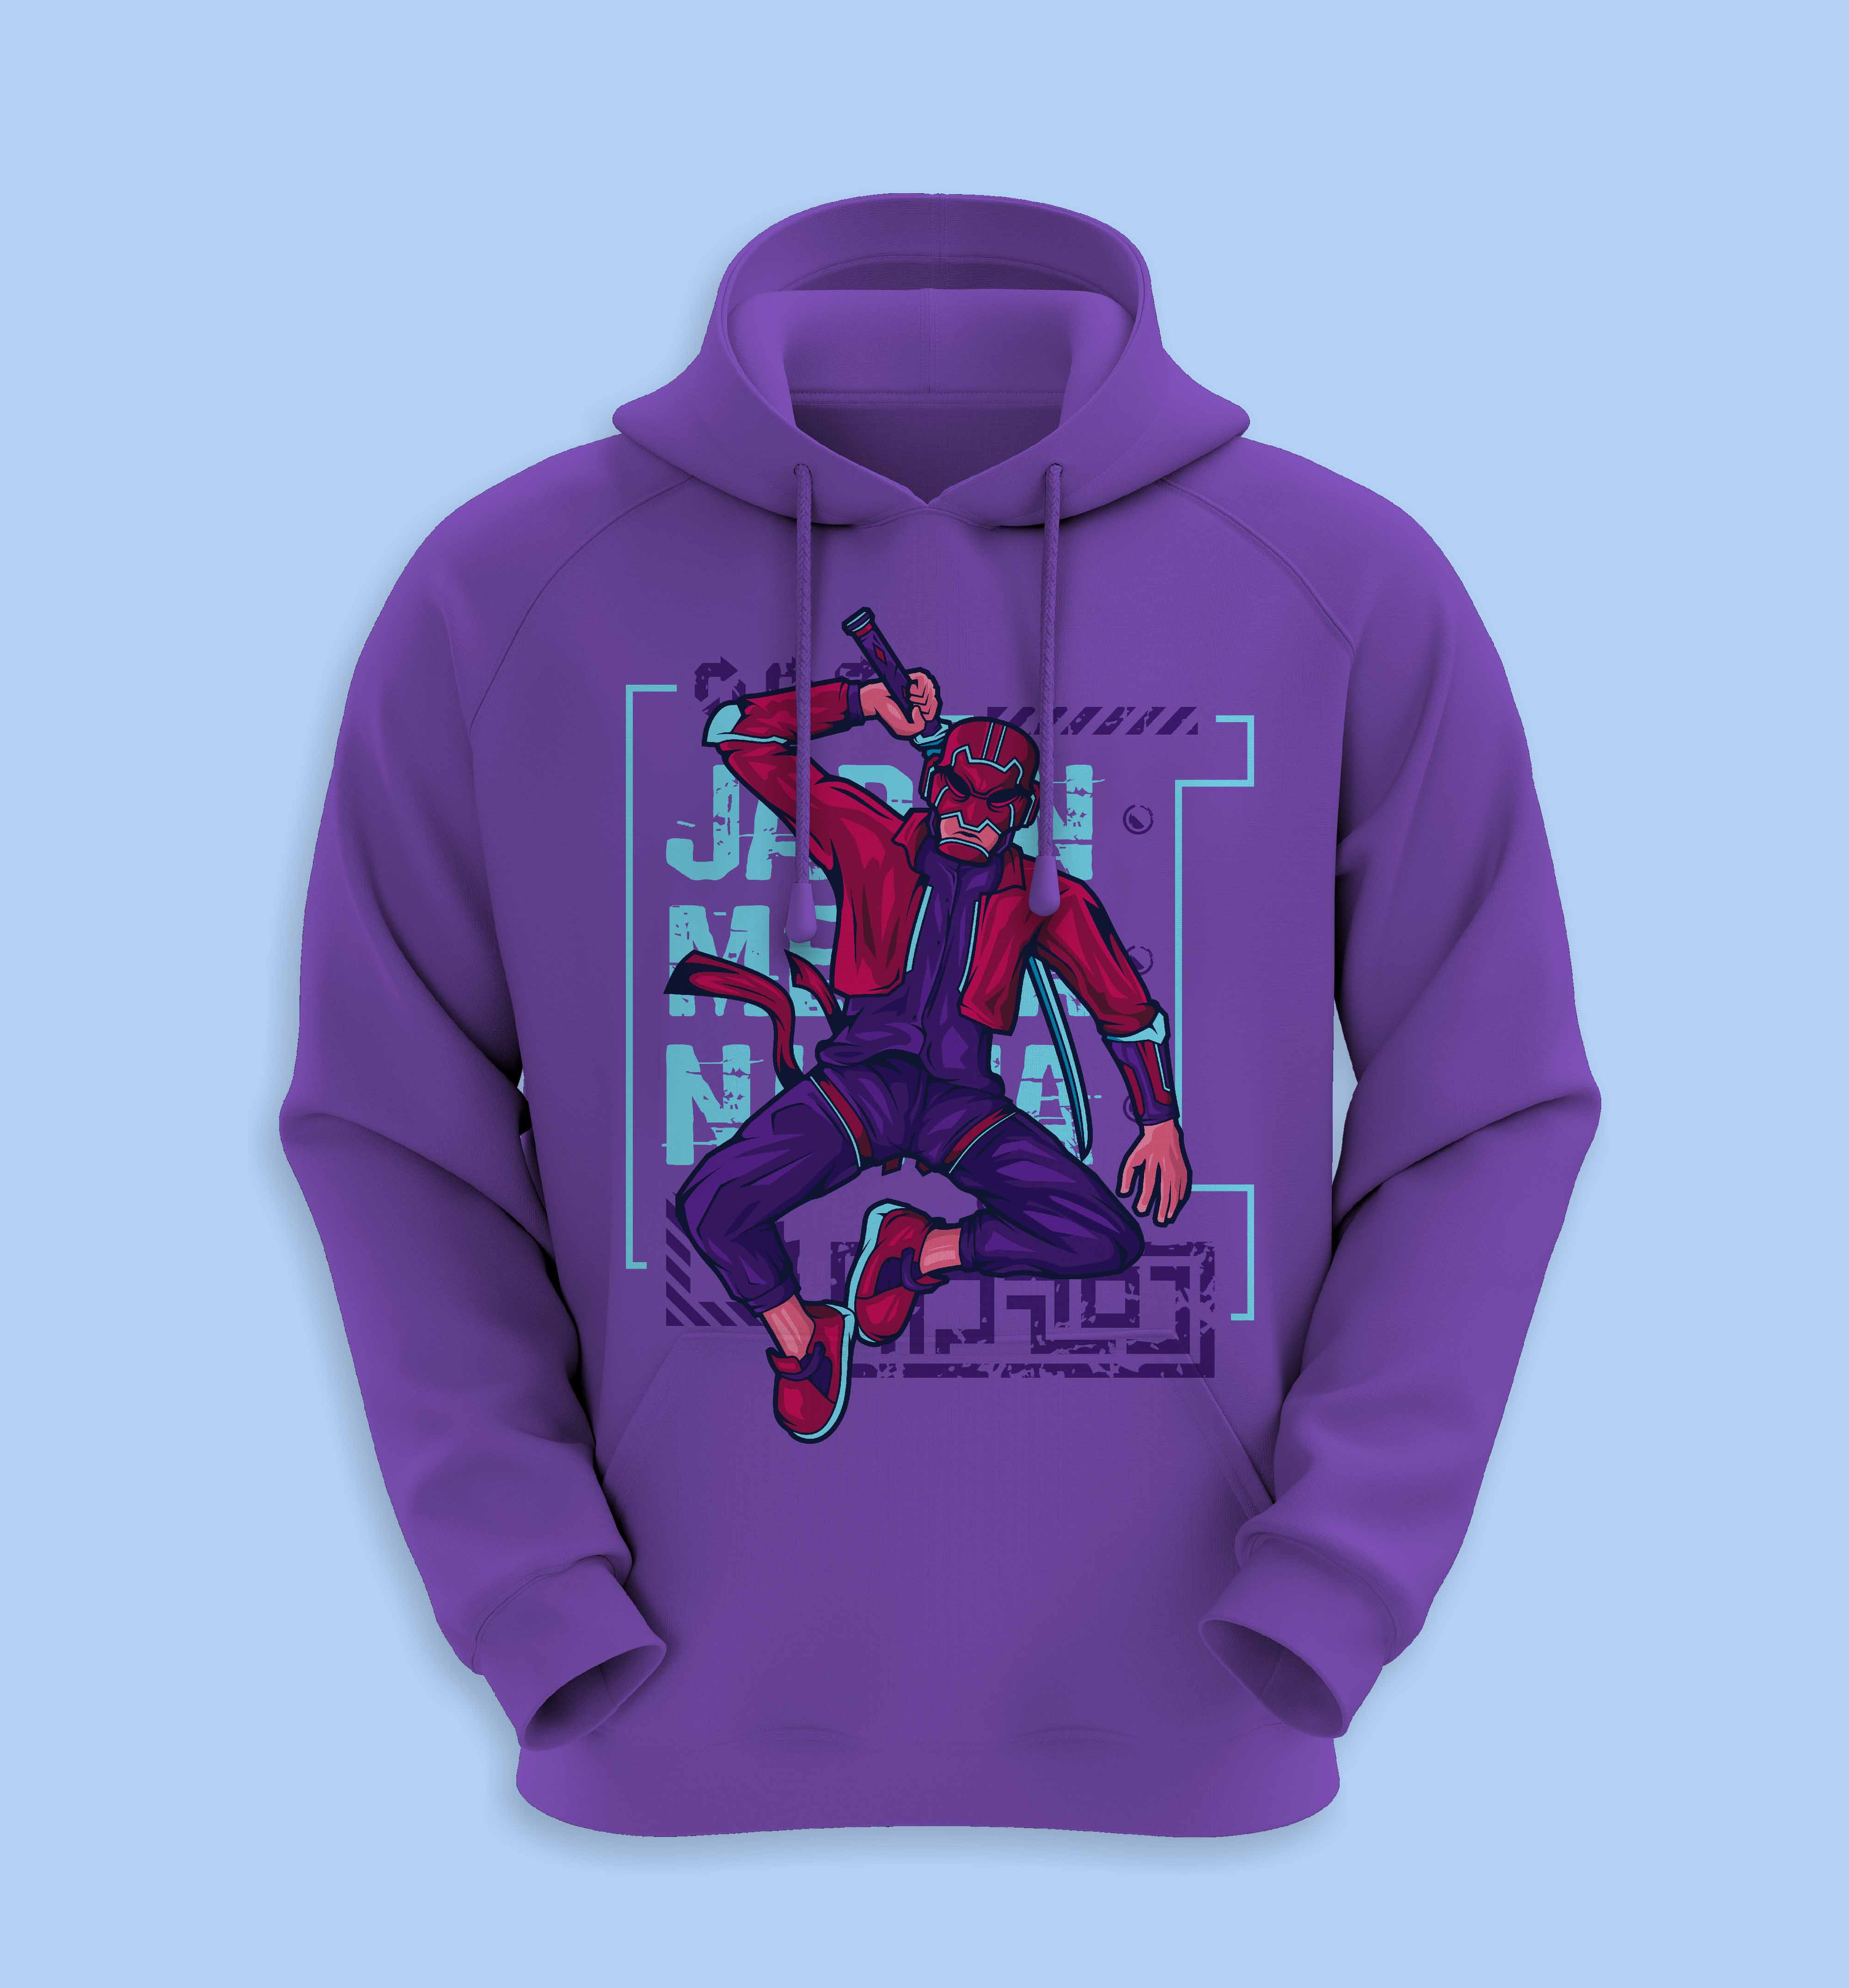 Purple hoodie with a drawing of a man in a red jacket.